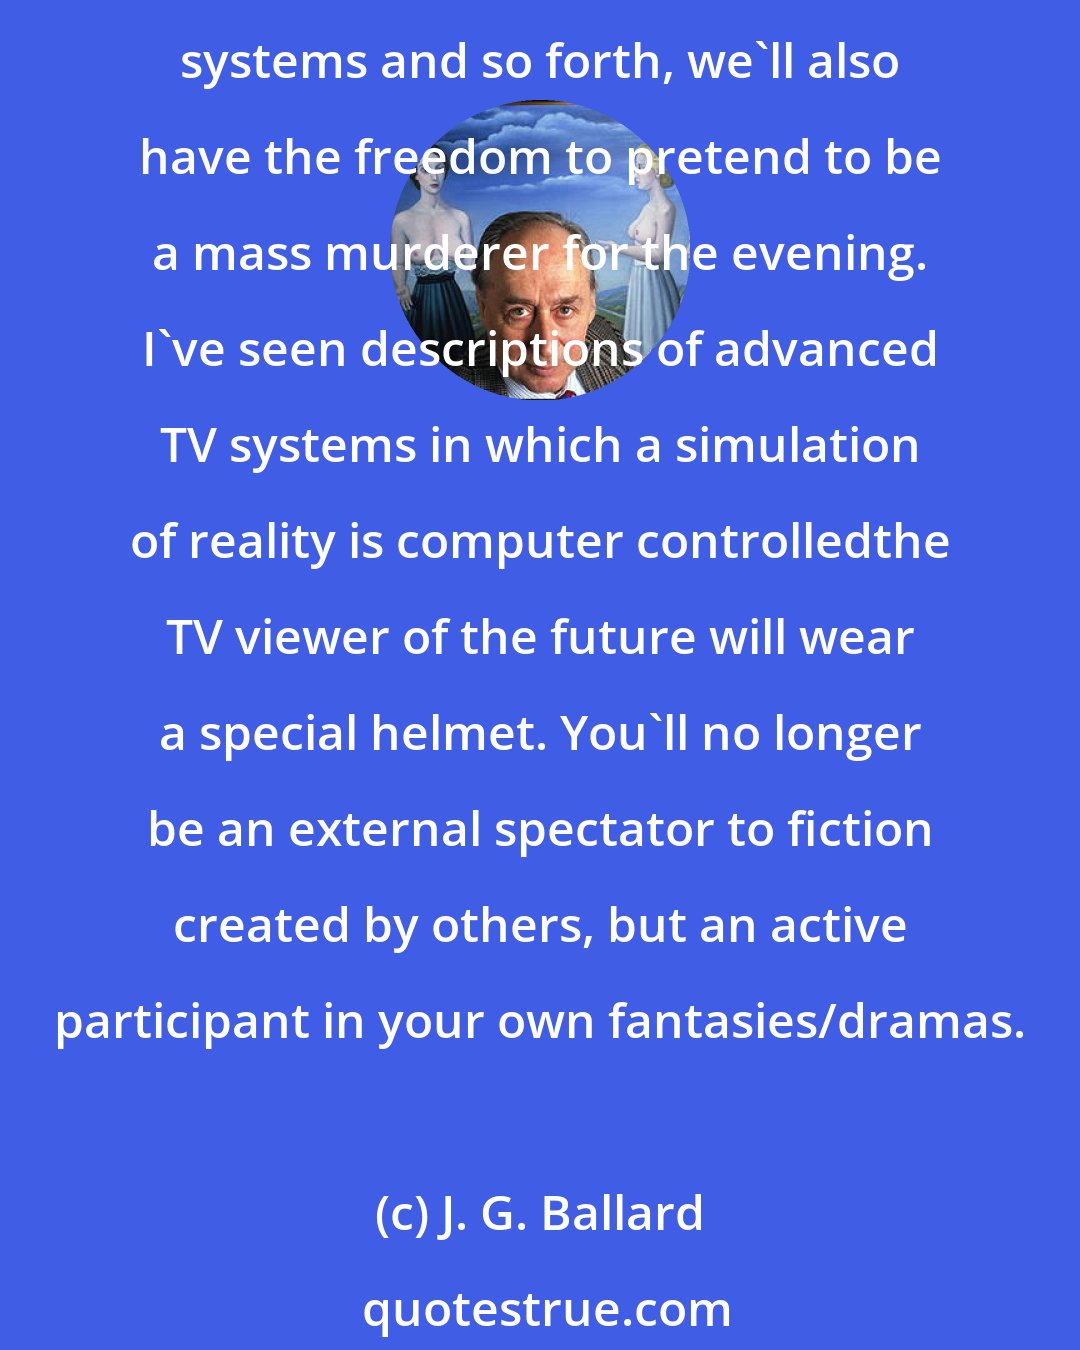 J. G. Ballard: The functional freedom that anybody can buy a gun and go out and murder a lot of people at a McDonald's is prevalent, yes. But through the effects of TV and interactive video systems and so forth, we'll also have the freedom to pretend to be a mass murderer for the evening. I've seen descriptions of advanced TV systems in which a simulation of reality is computer controlledthe TV viewer of the future will wear a special helmet. You'll no longer be an external spectator to ﬁction created by others, but an active participant in your own fantasies/dramas.